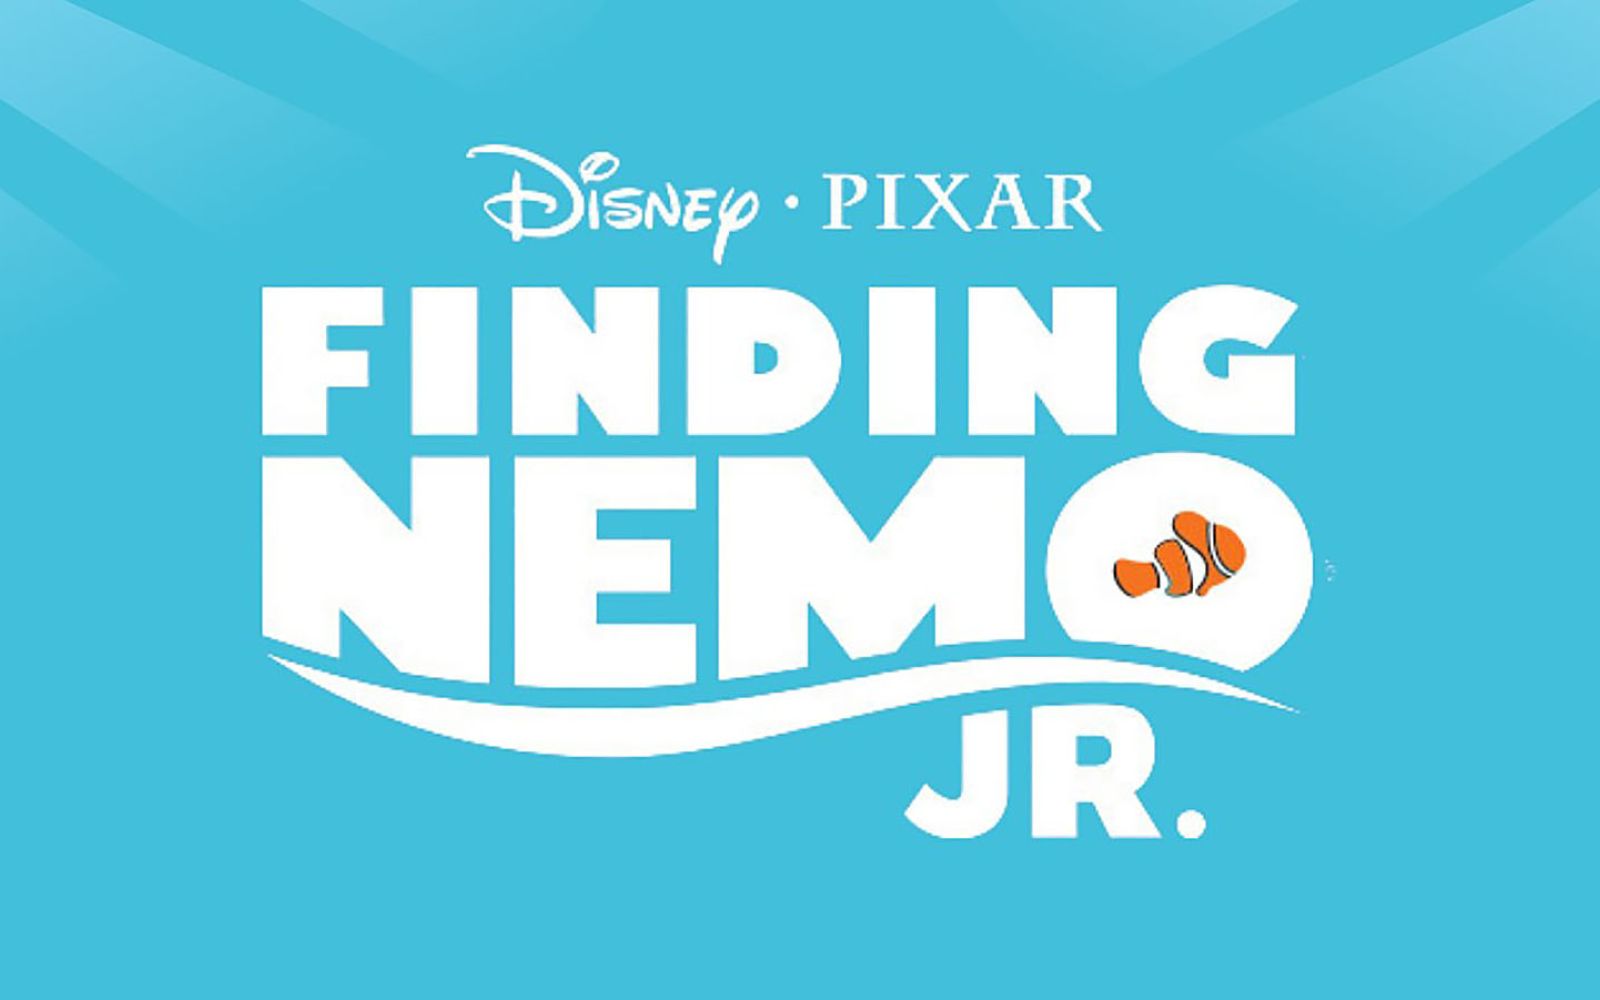 Fire & Light Productions will present "Finding Nemo Jr." at Arts United Center, April 11-13.